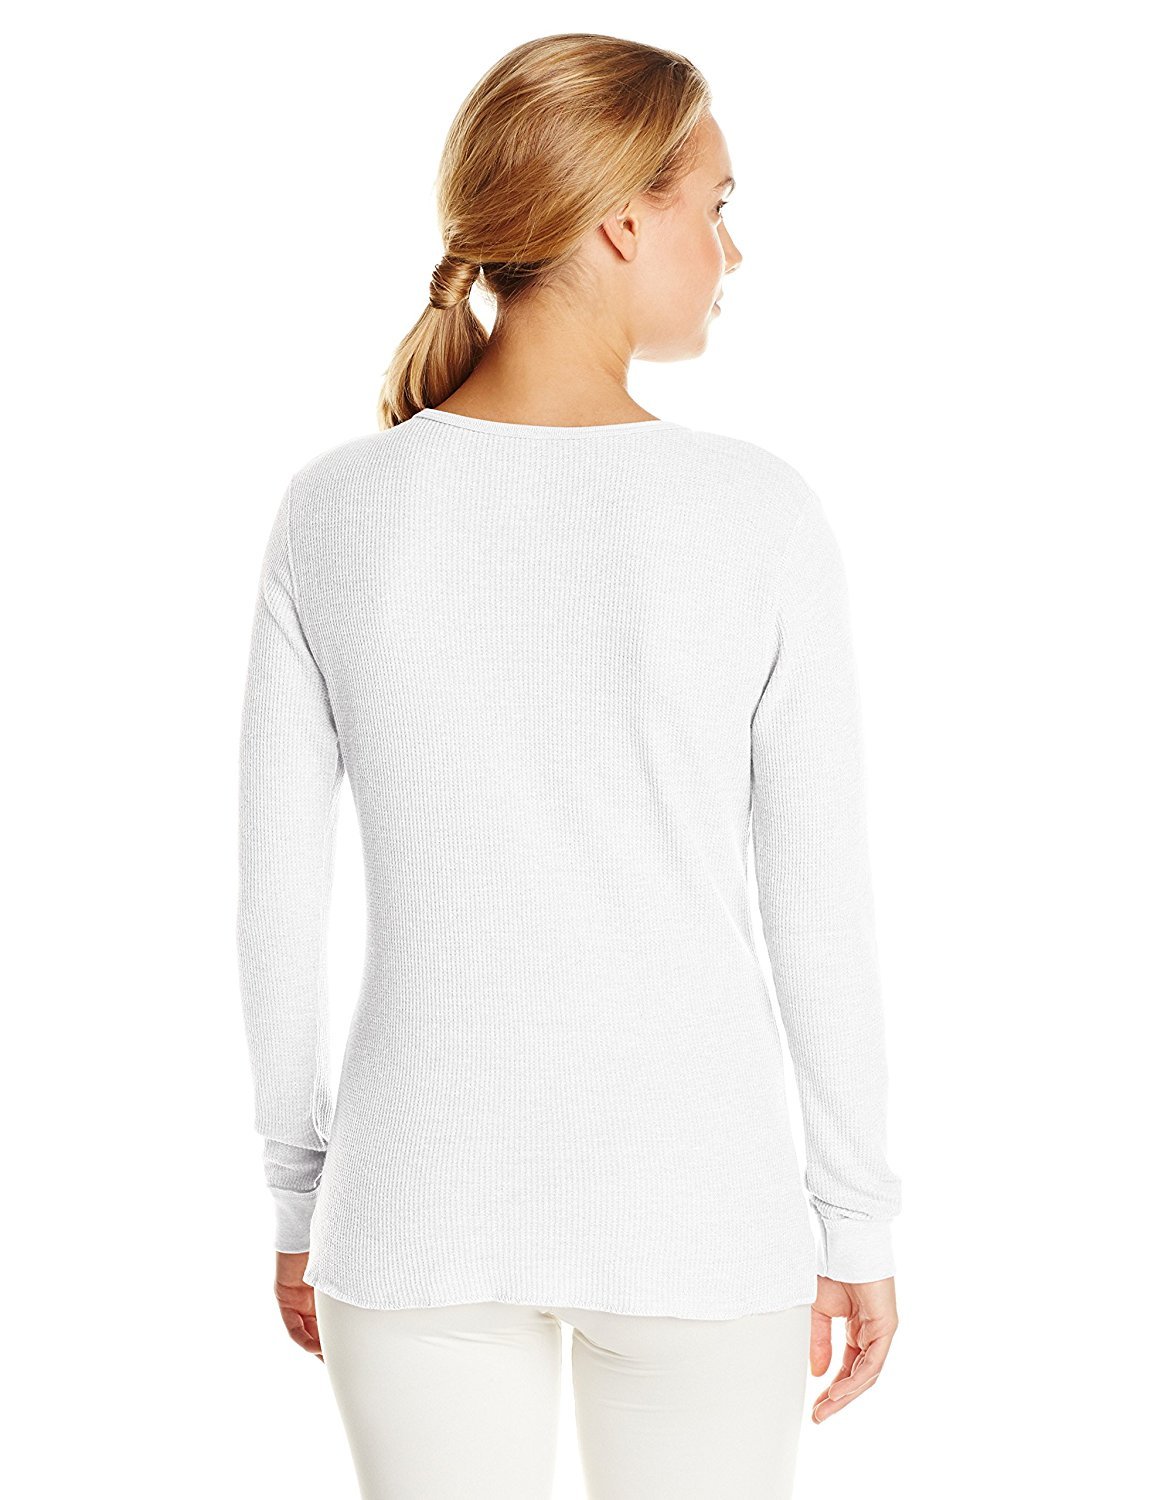 Women's Waffle Thermal Underwear Top - image 2 of 2